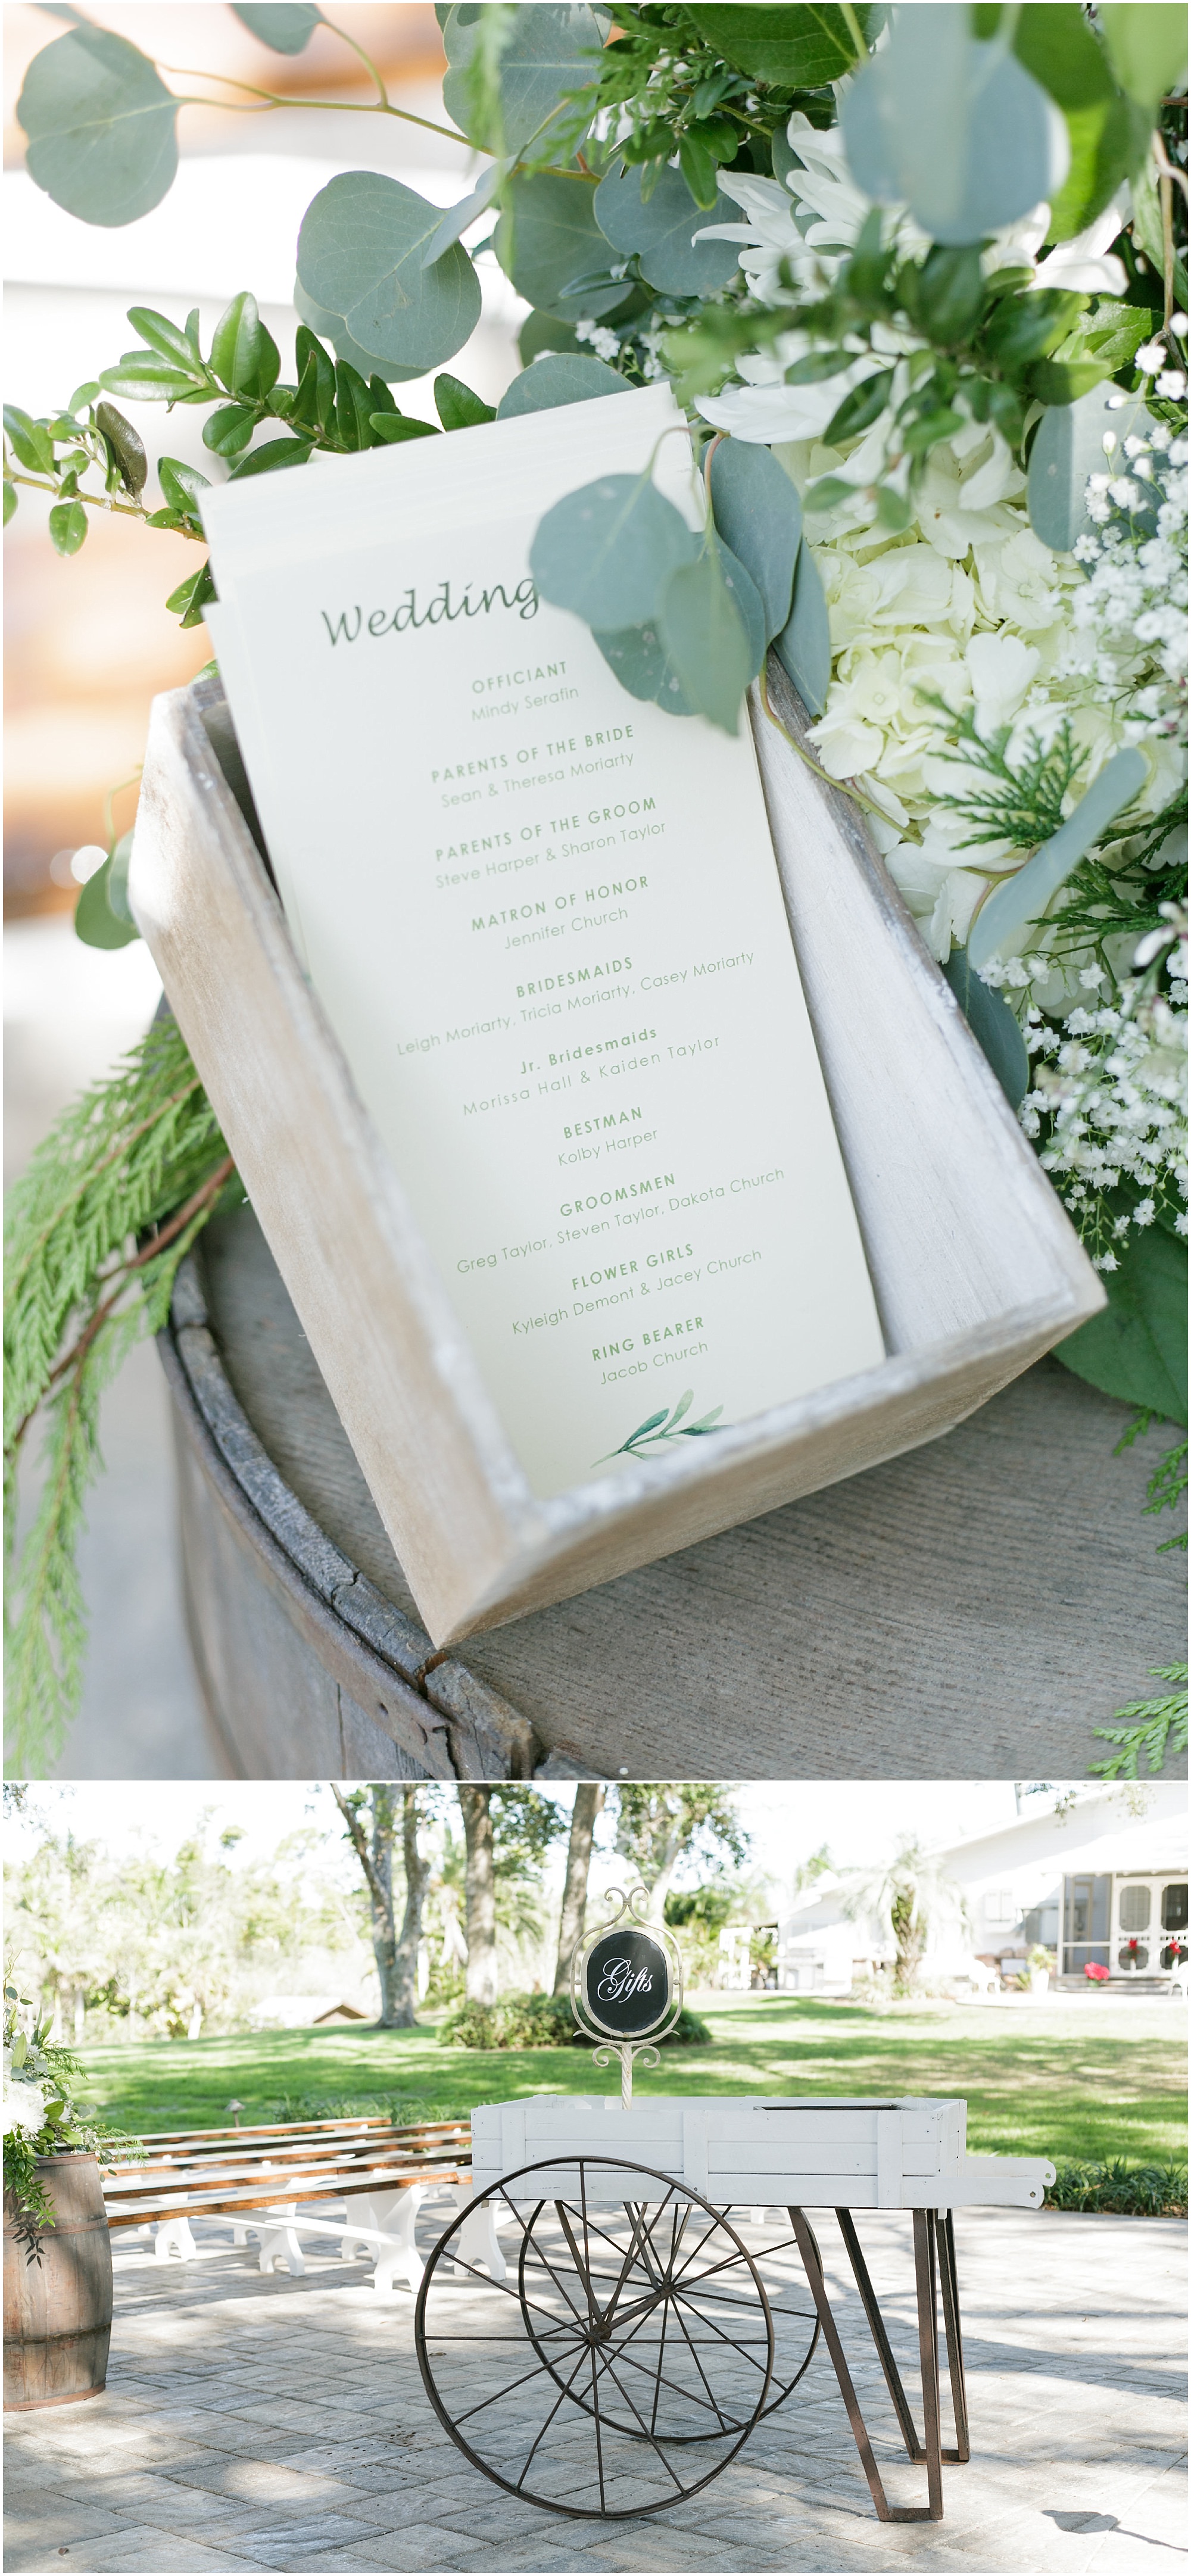 Rustic wedding programs and gift stand made from a wagon. 